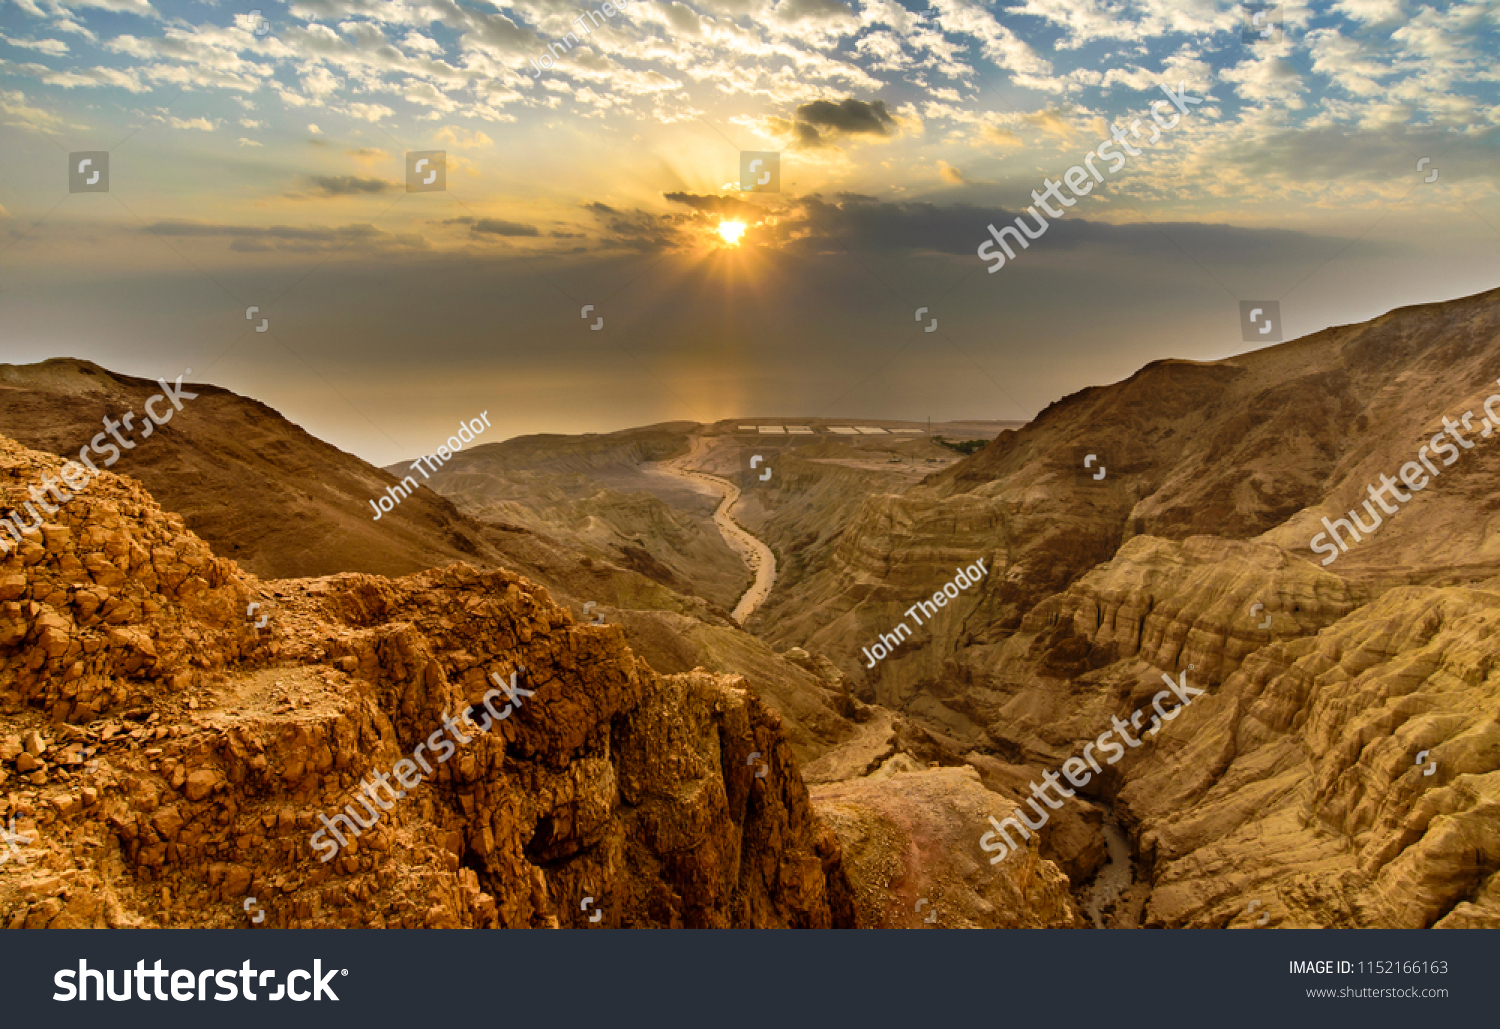 Beautiful landscape of Israeli Judean Desert mountains, with sunrise over the dry riverbed of Nahal Dragot Wadi, popular hiking trail winding between rugged rocky cliffs towards the Dead Sea #1152166163